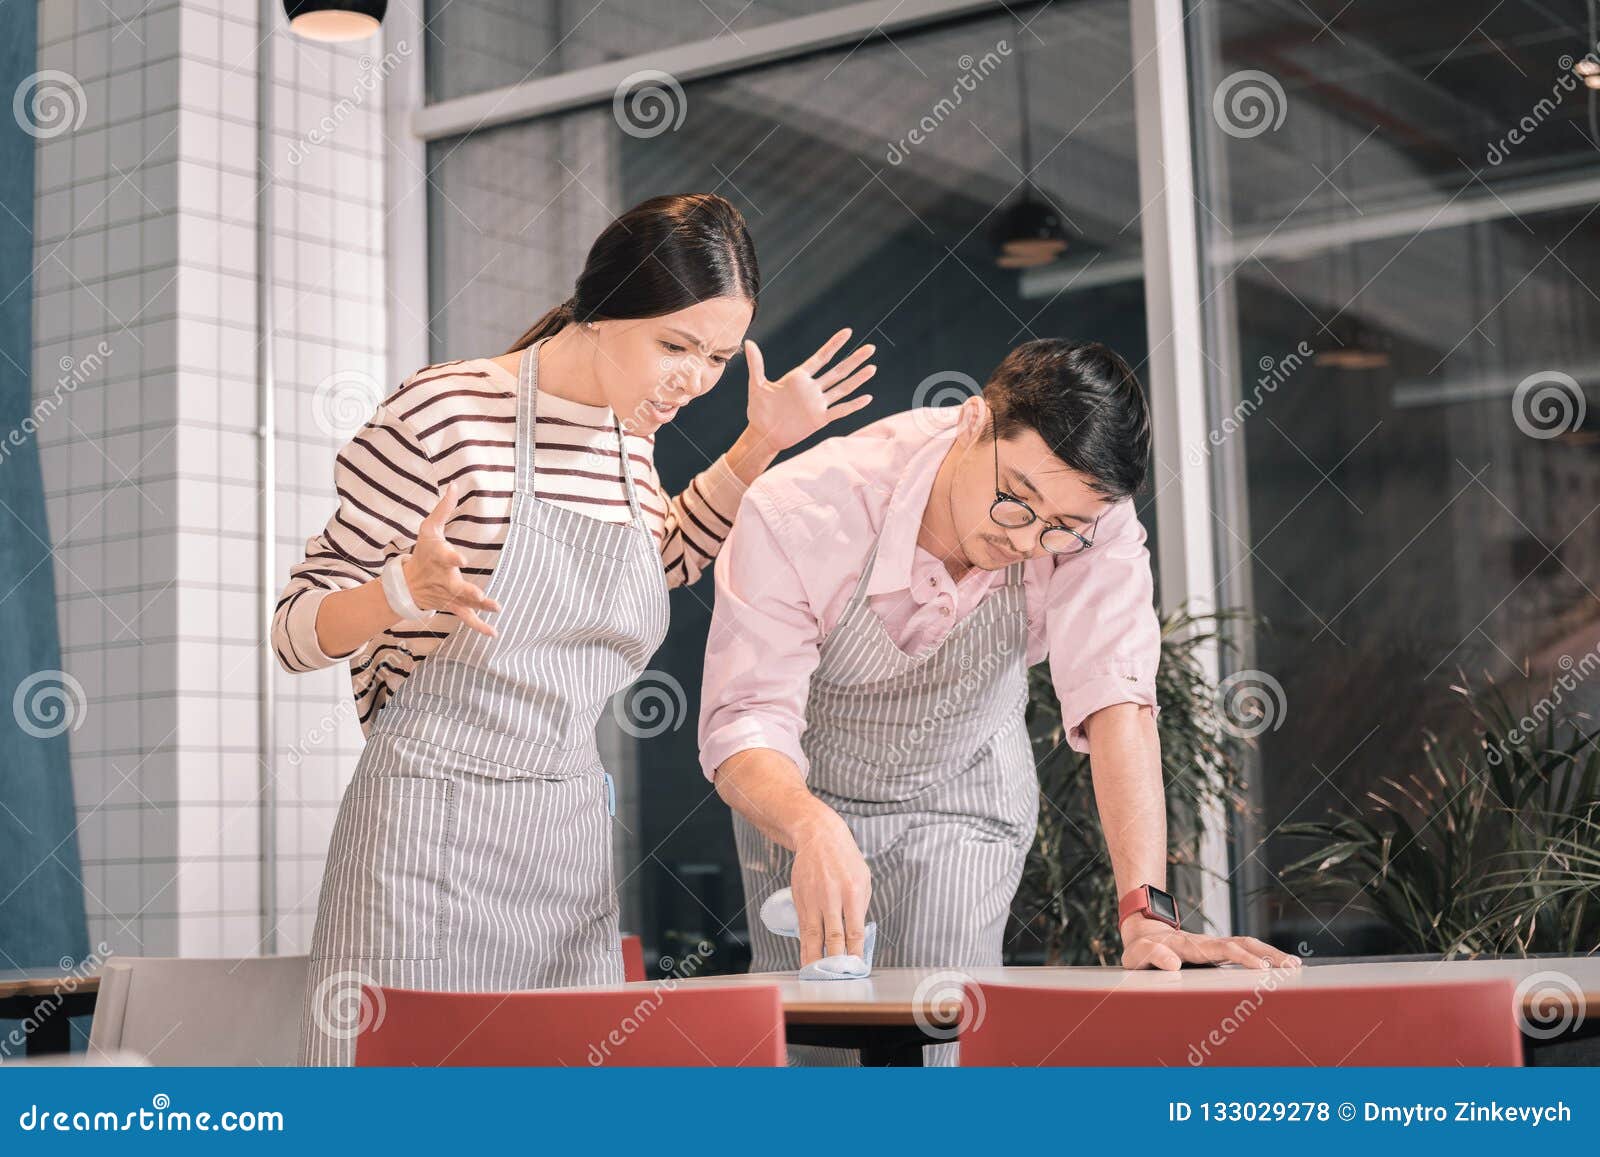 owner of cafeteria feeling unsatisfied checking the cleanness of table